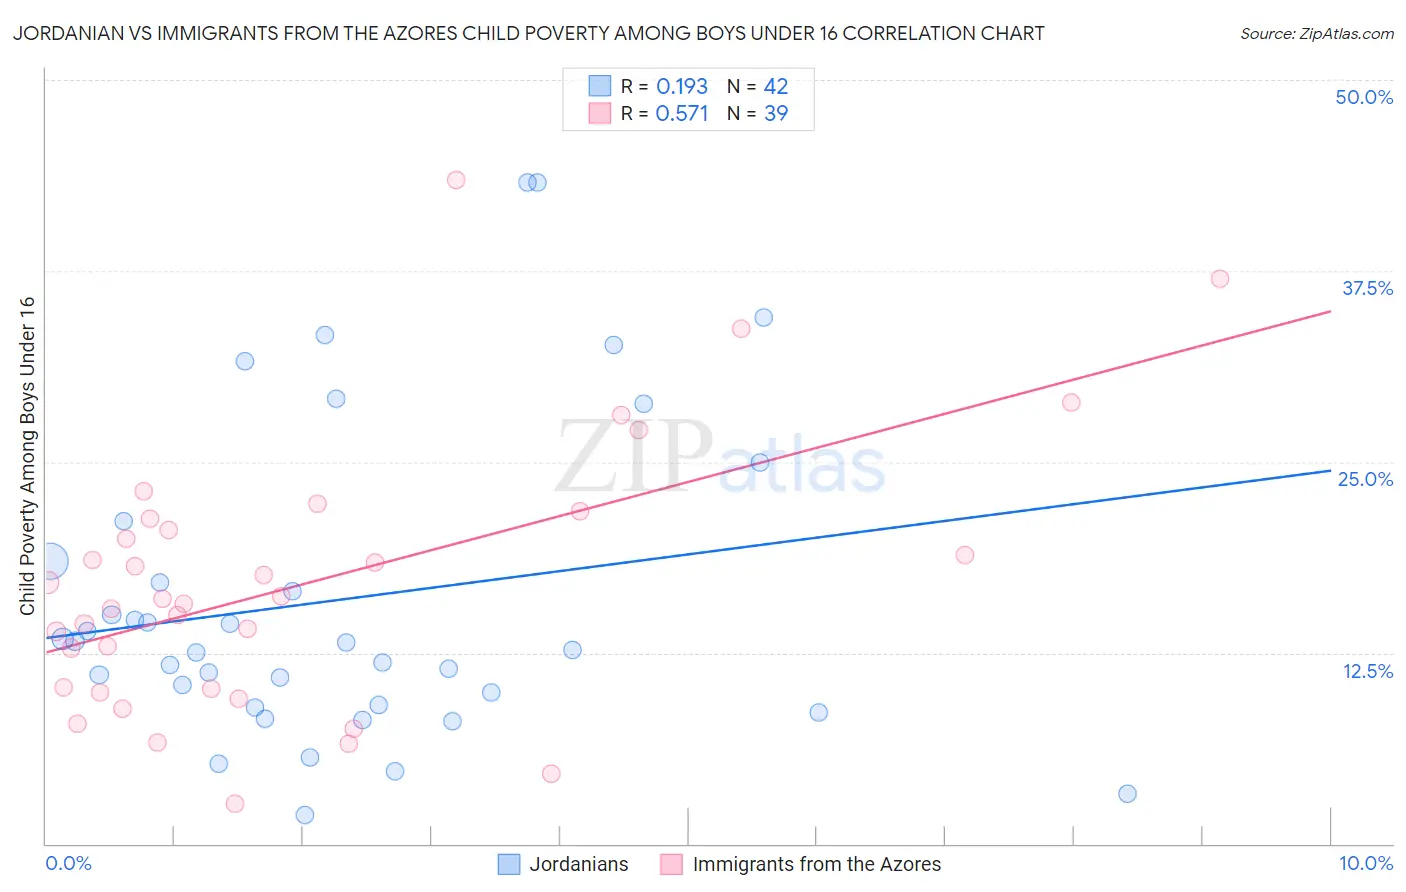 Jordanian vs Immigrants from the Azores Child Poverty Among Boys Under 16